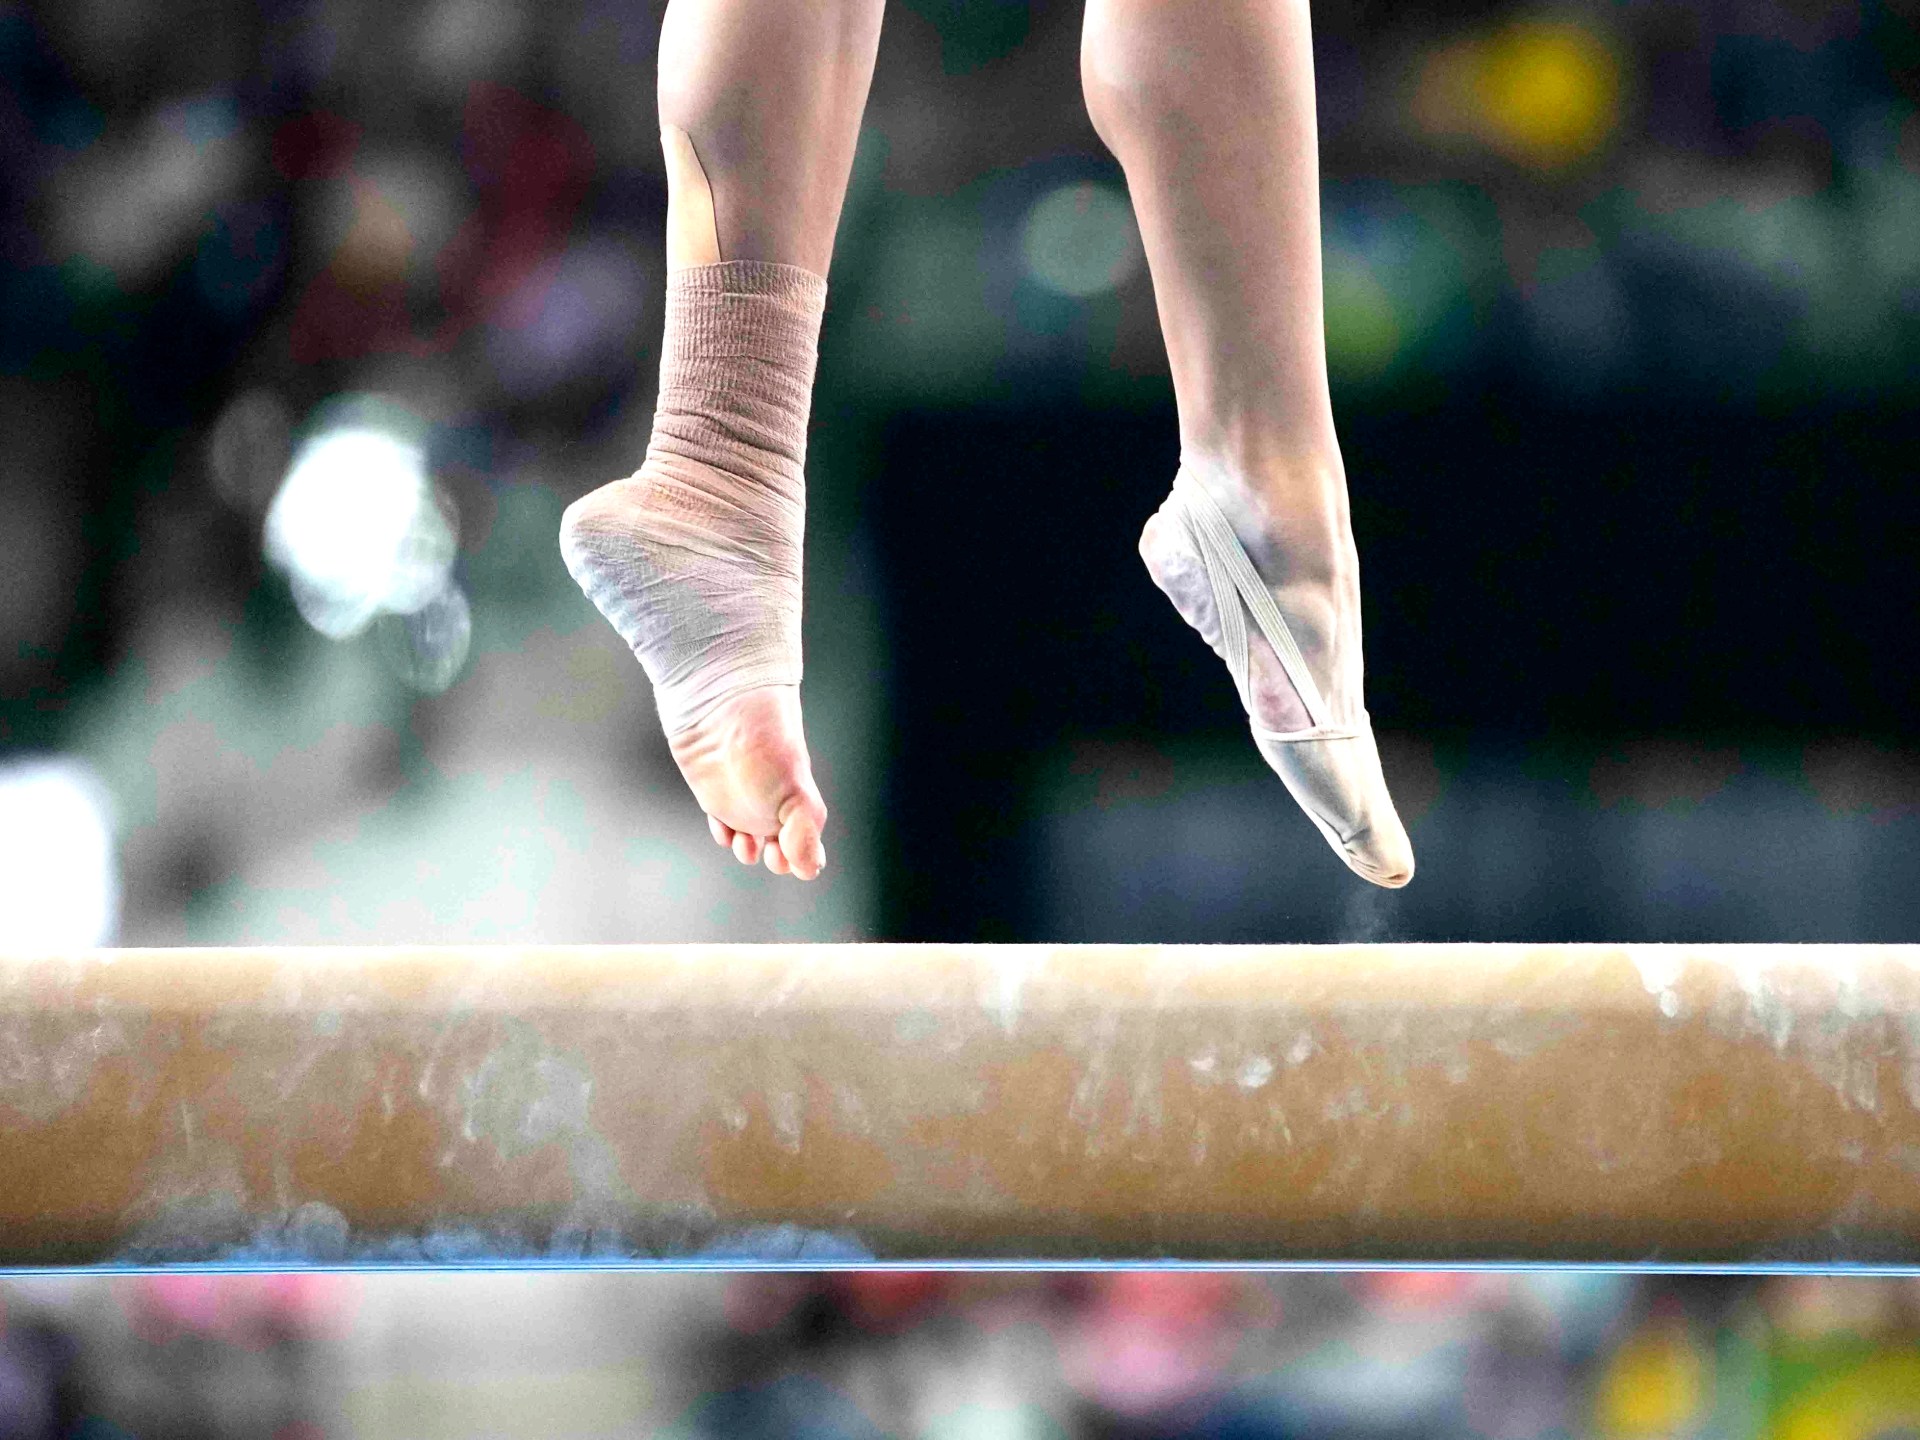 British Gymnastics bans coaches from weighing young athletes | Child Rights News #British #Gymnastics #bans #coaches #weighing #young #athletes #Child #Rights #News